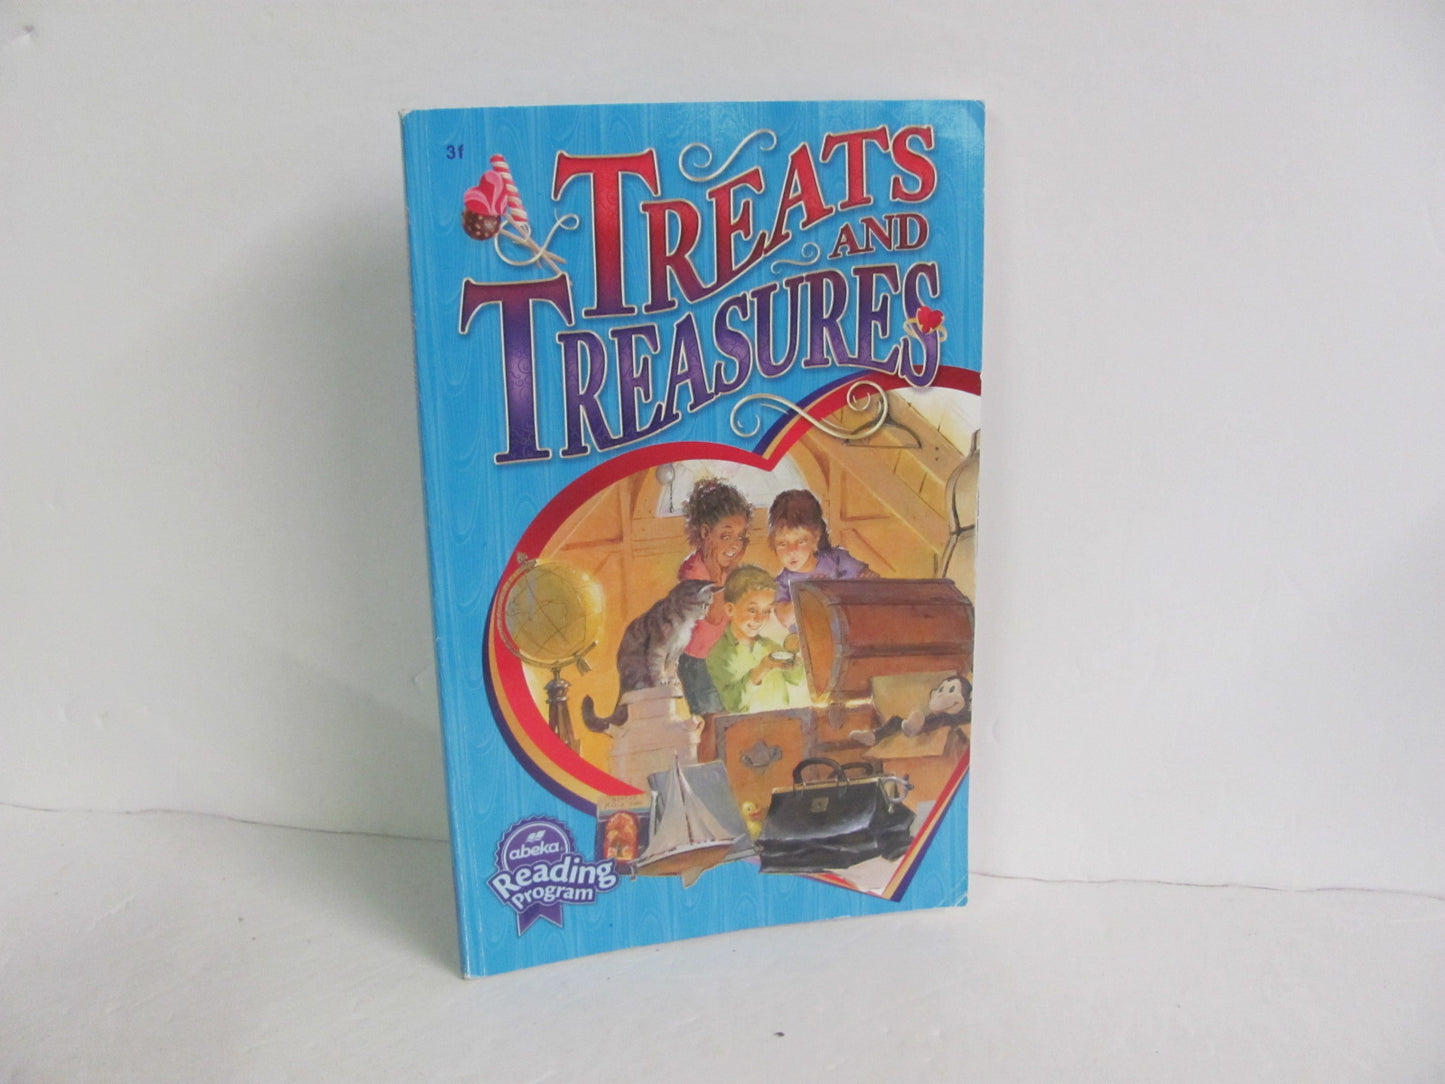 Treats and Treasures Abeka Student Book Pre-Owned 3rd Grade Reading Textbooks